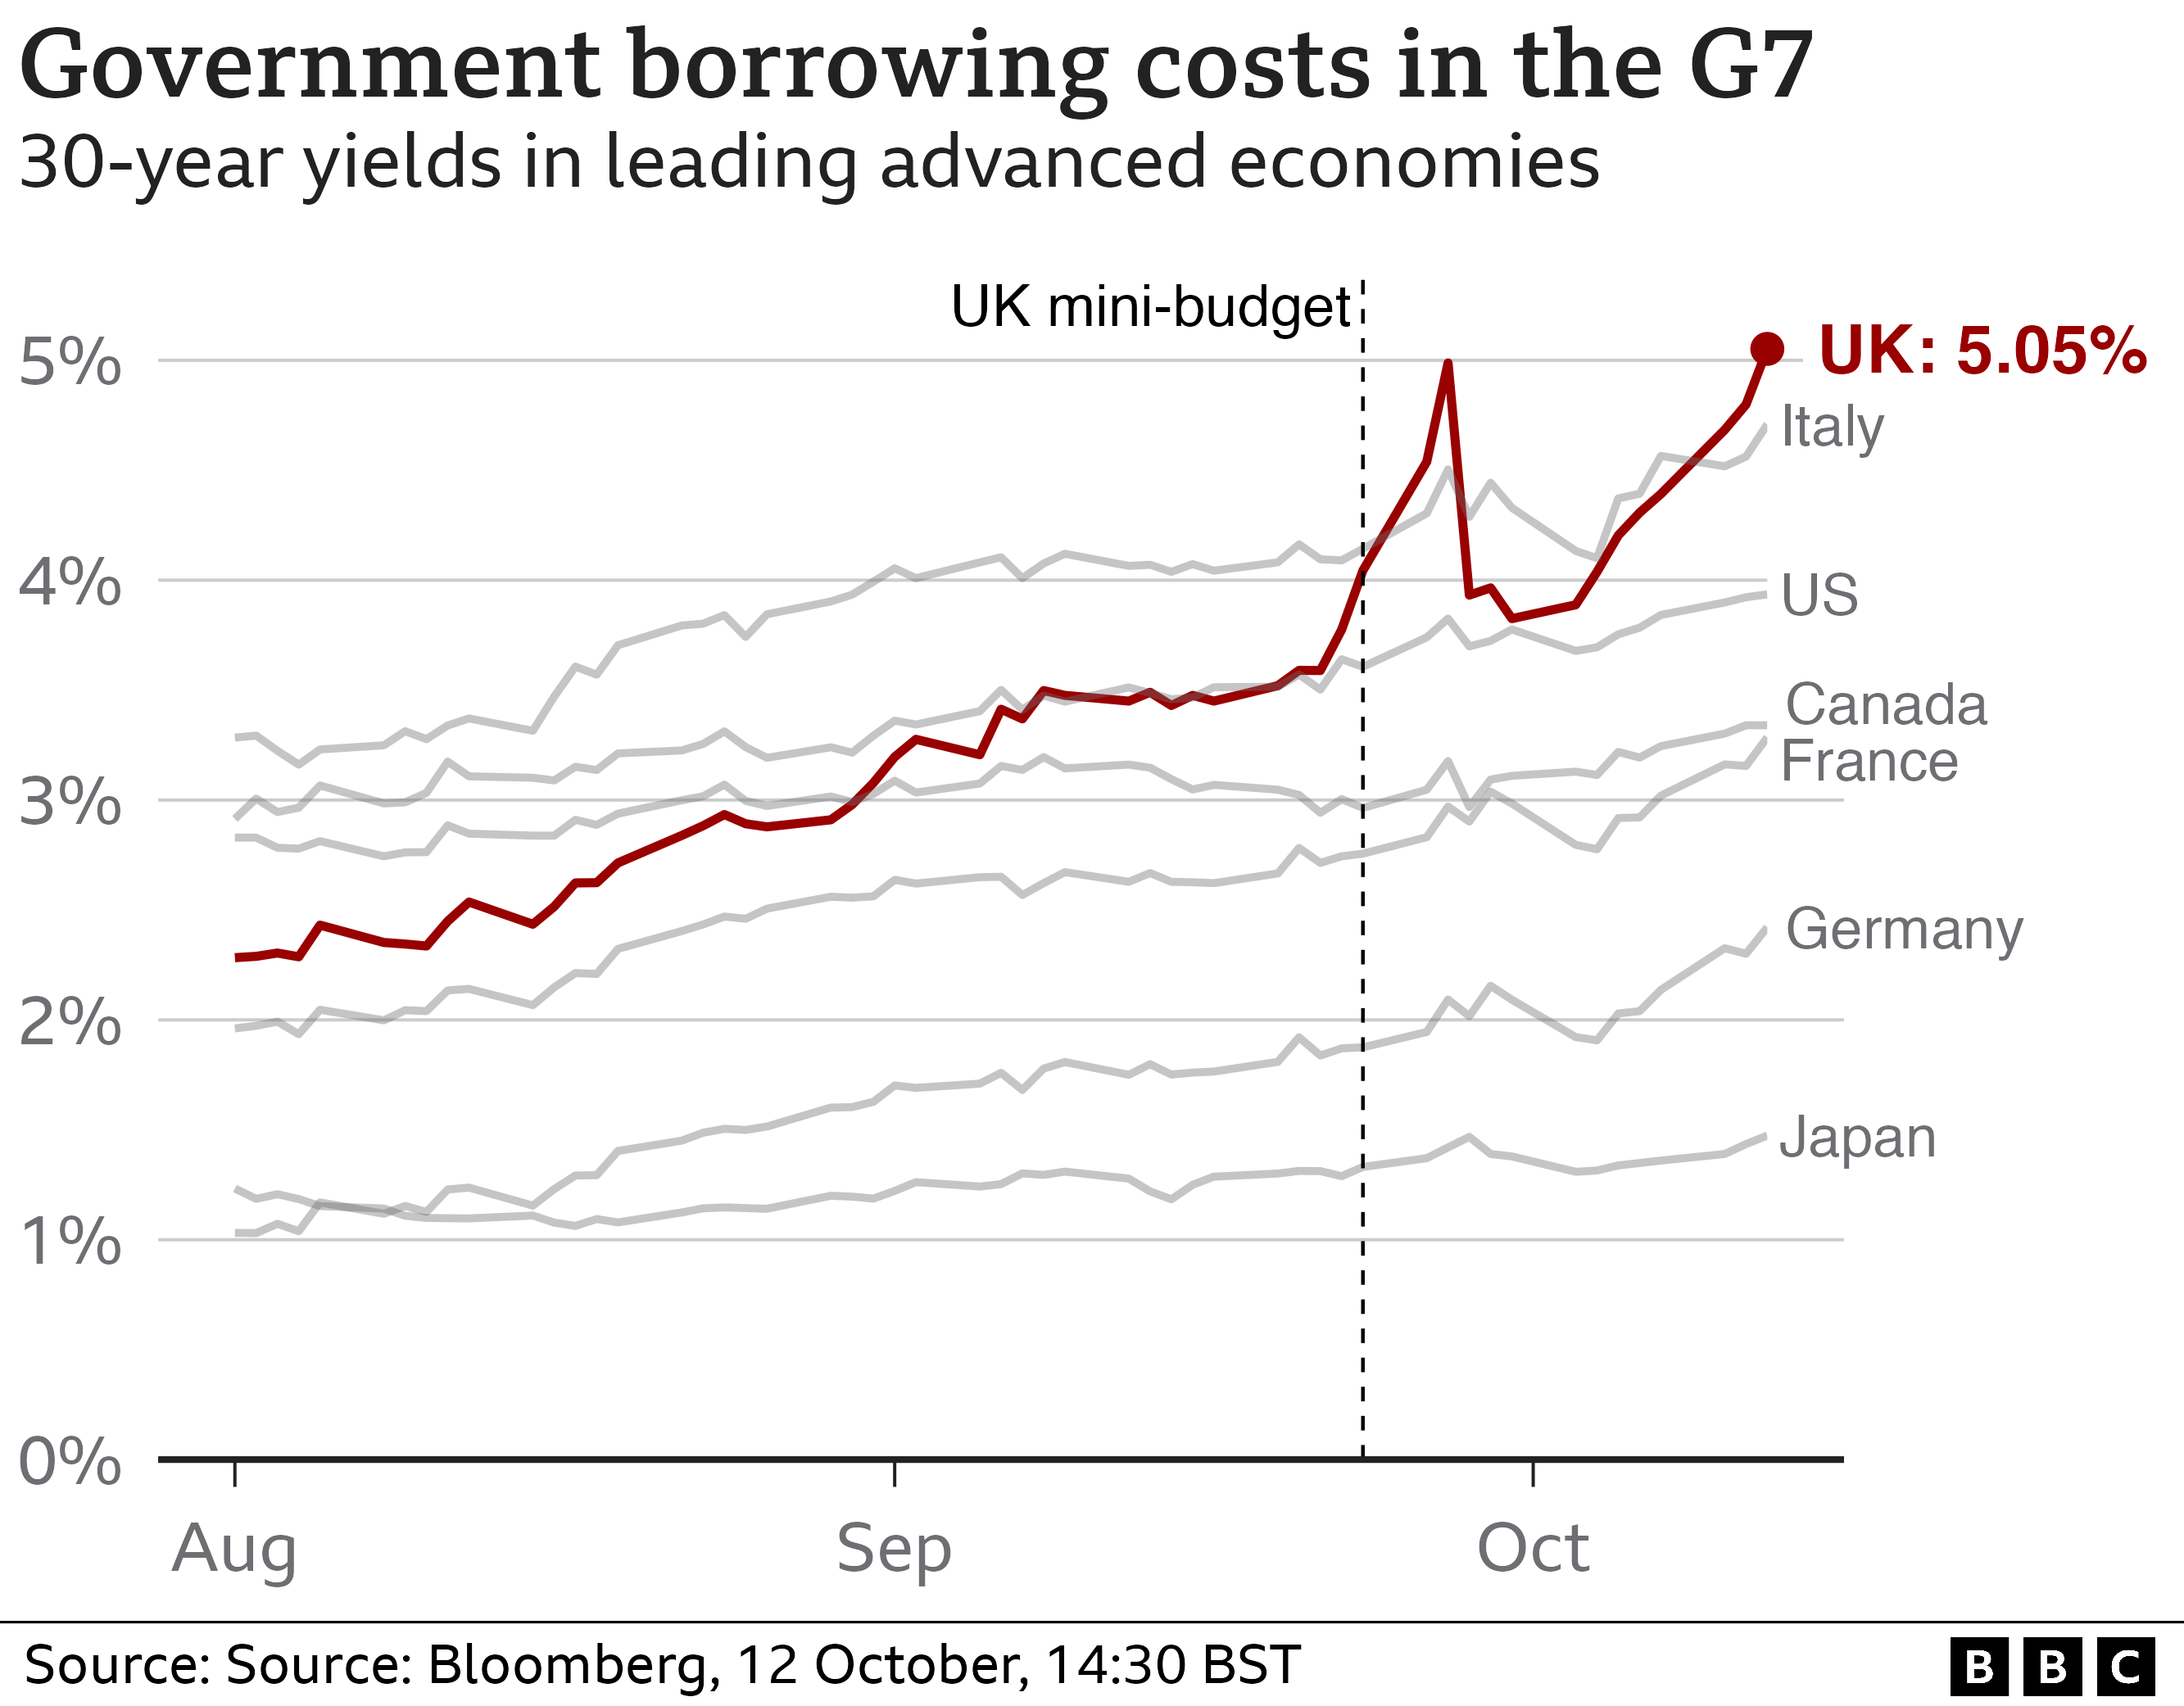 Chart showing government borrowing costs in the G7